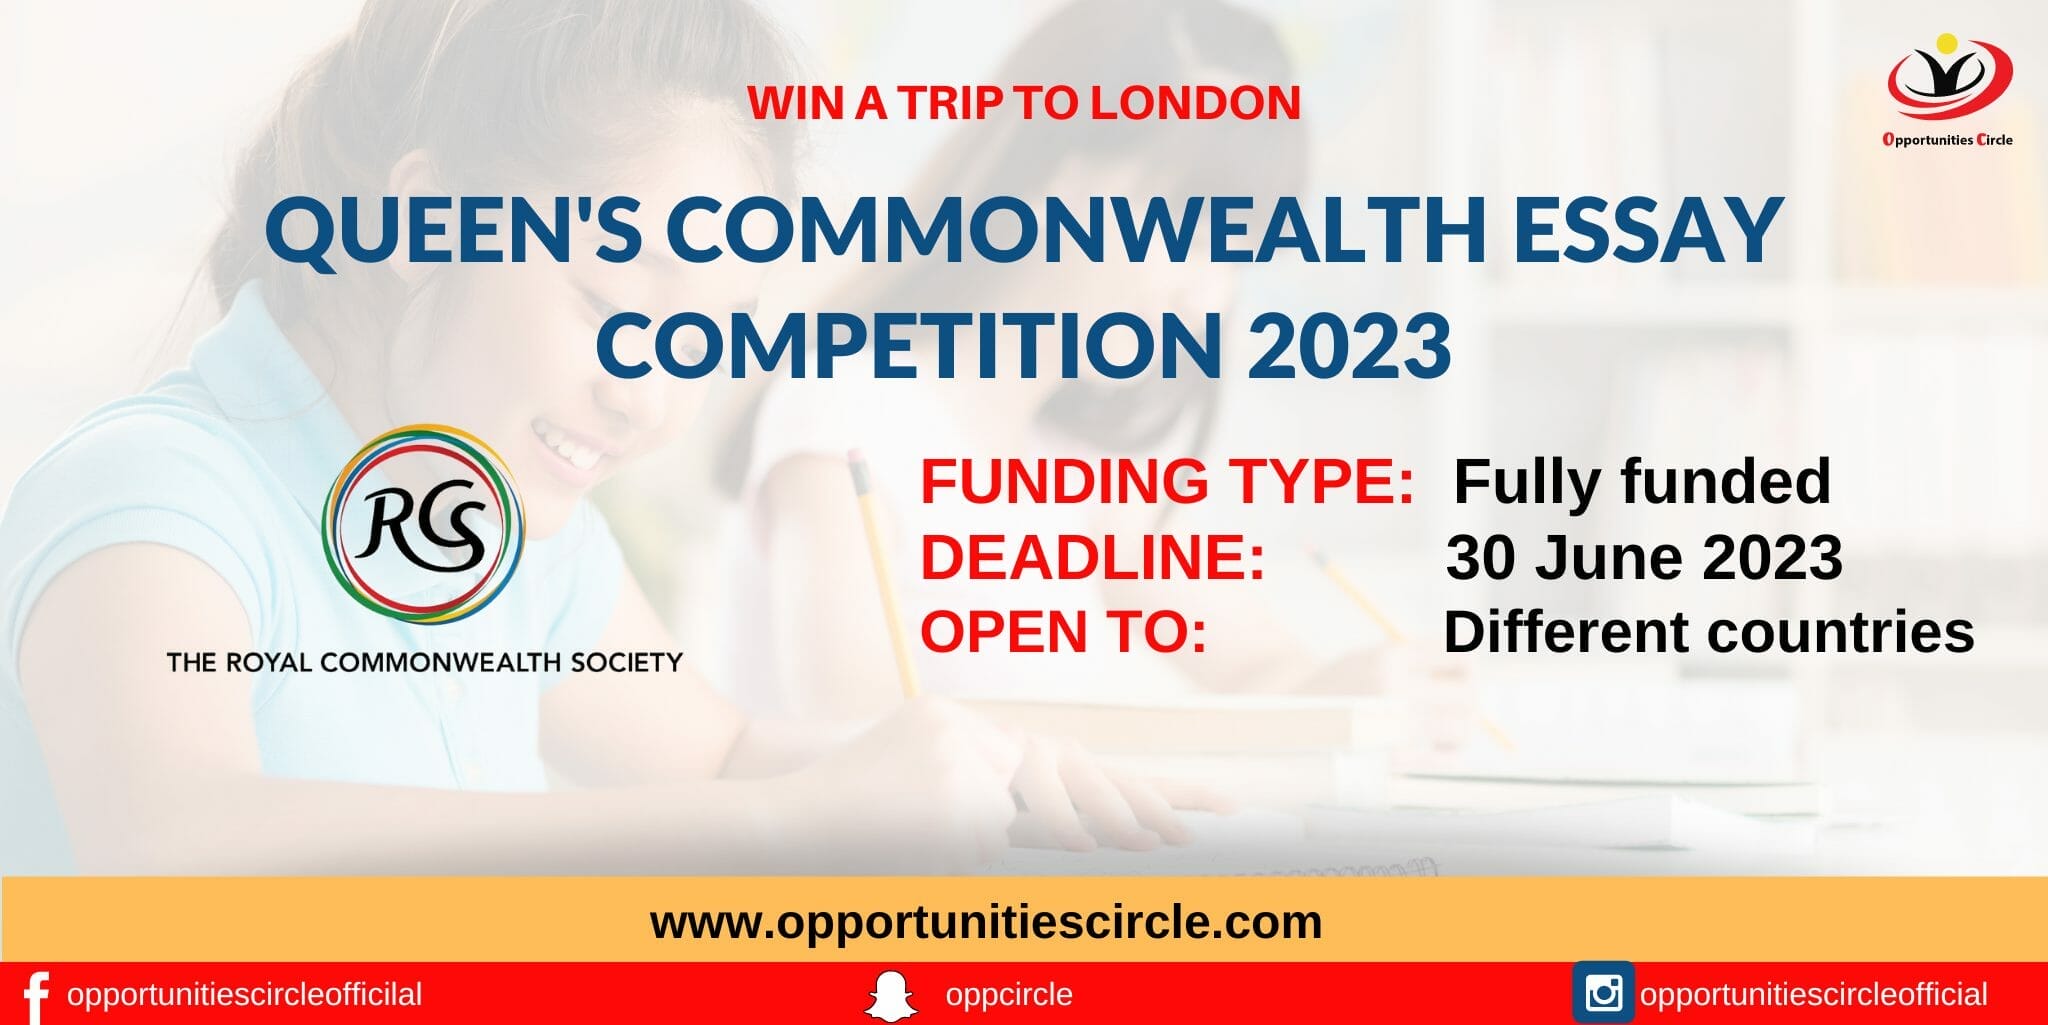 nch london essay competition 2023